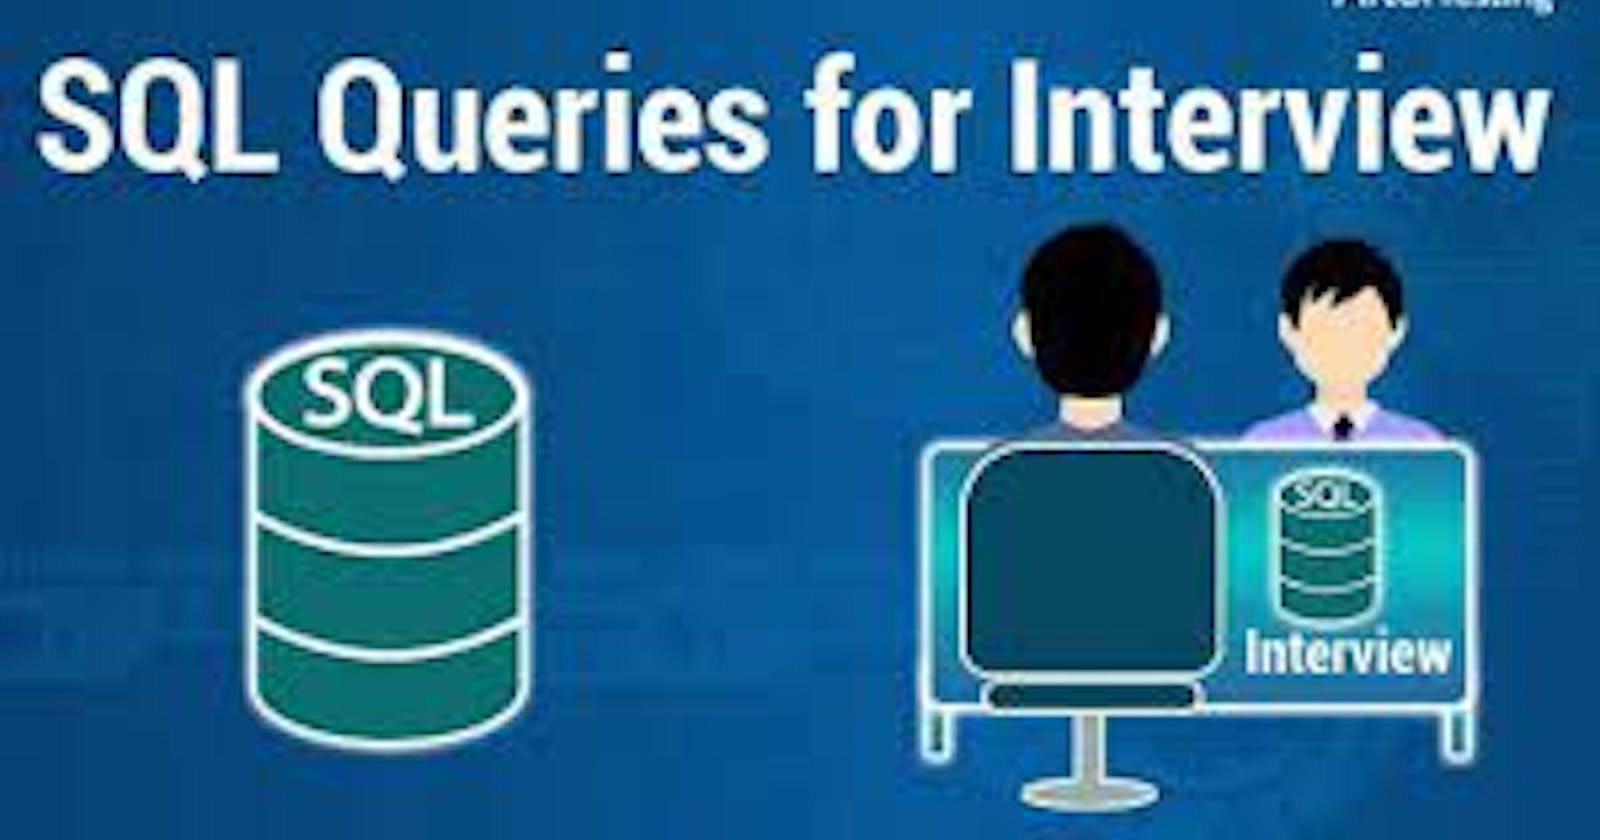 What are the top 10 SQL Queries for freshers and experienced?